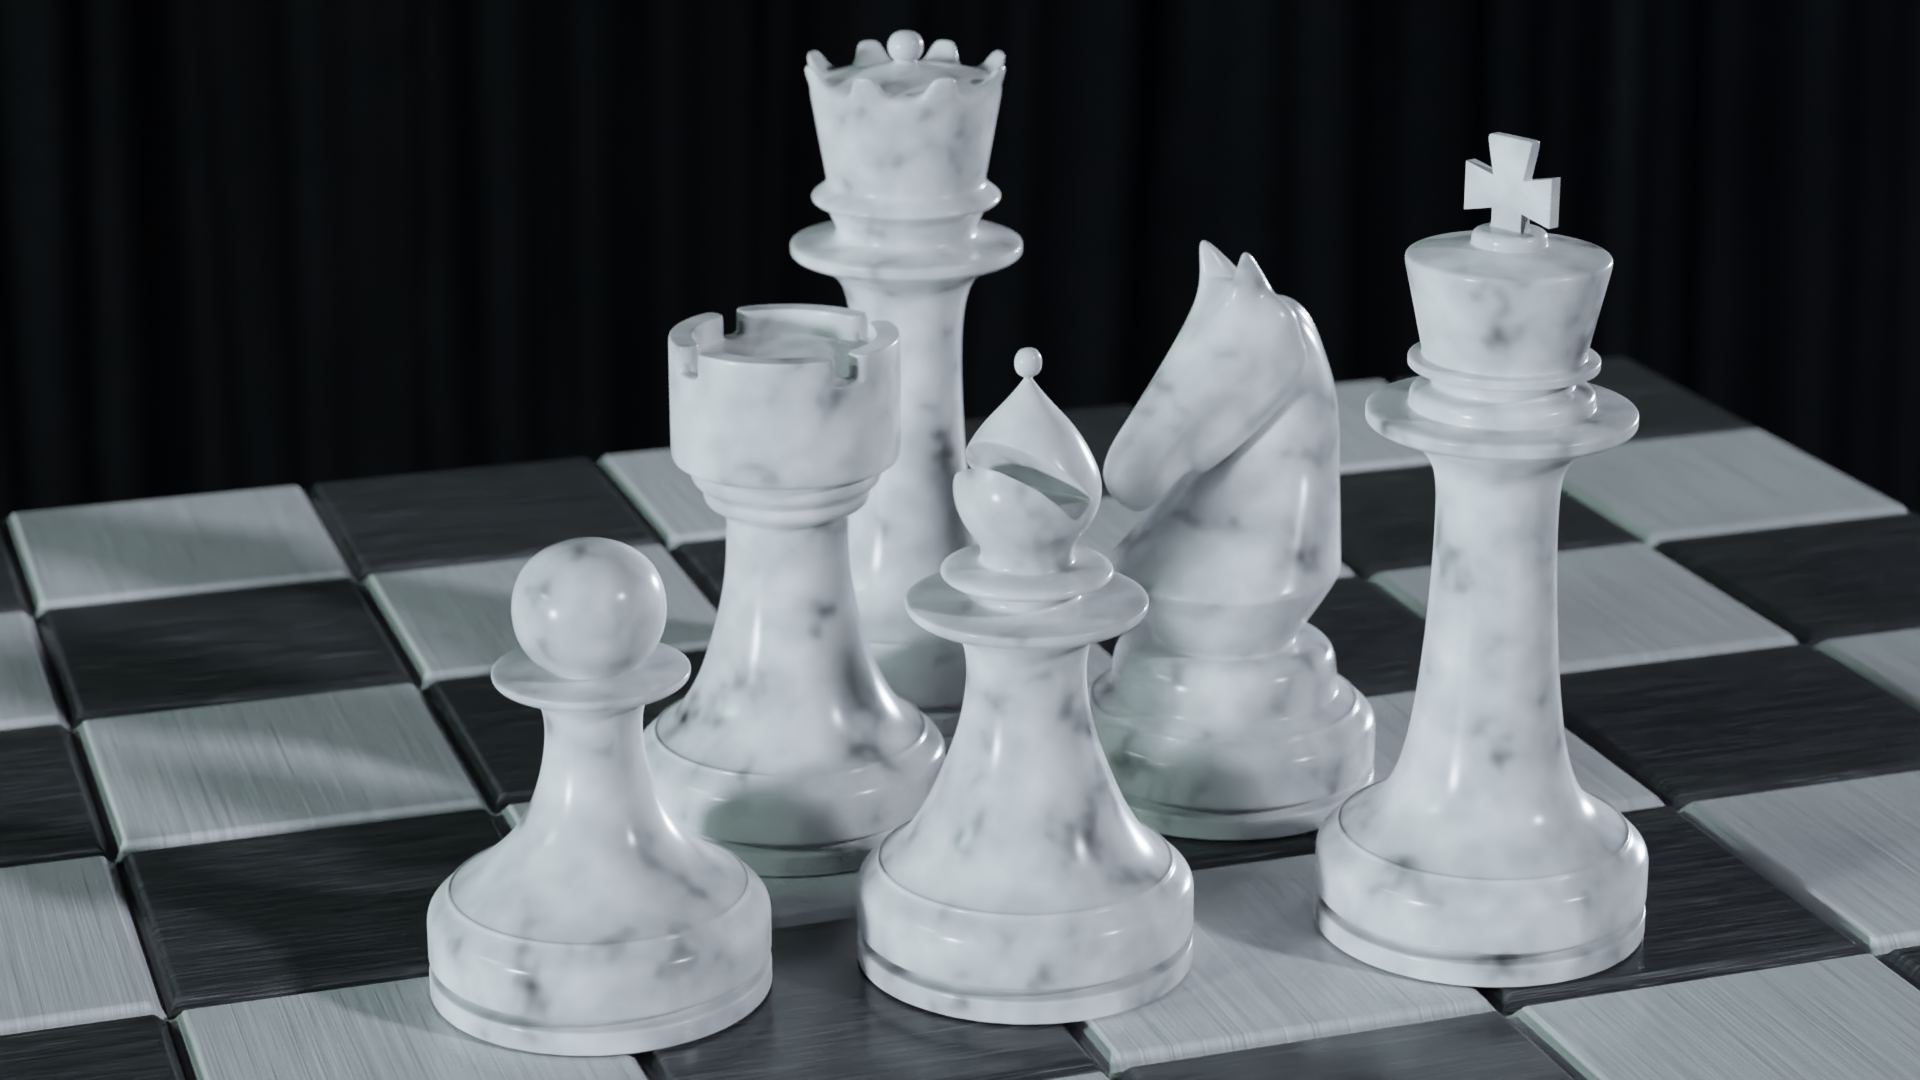 Chess preview image 1